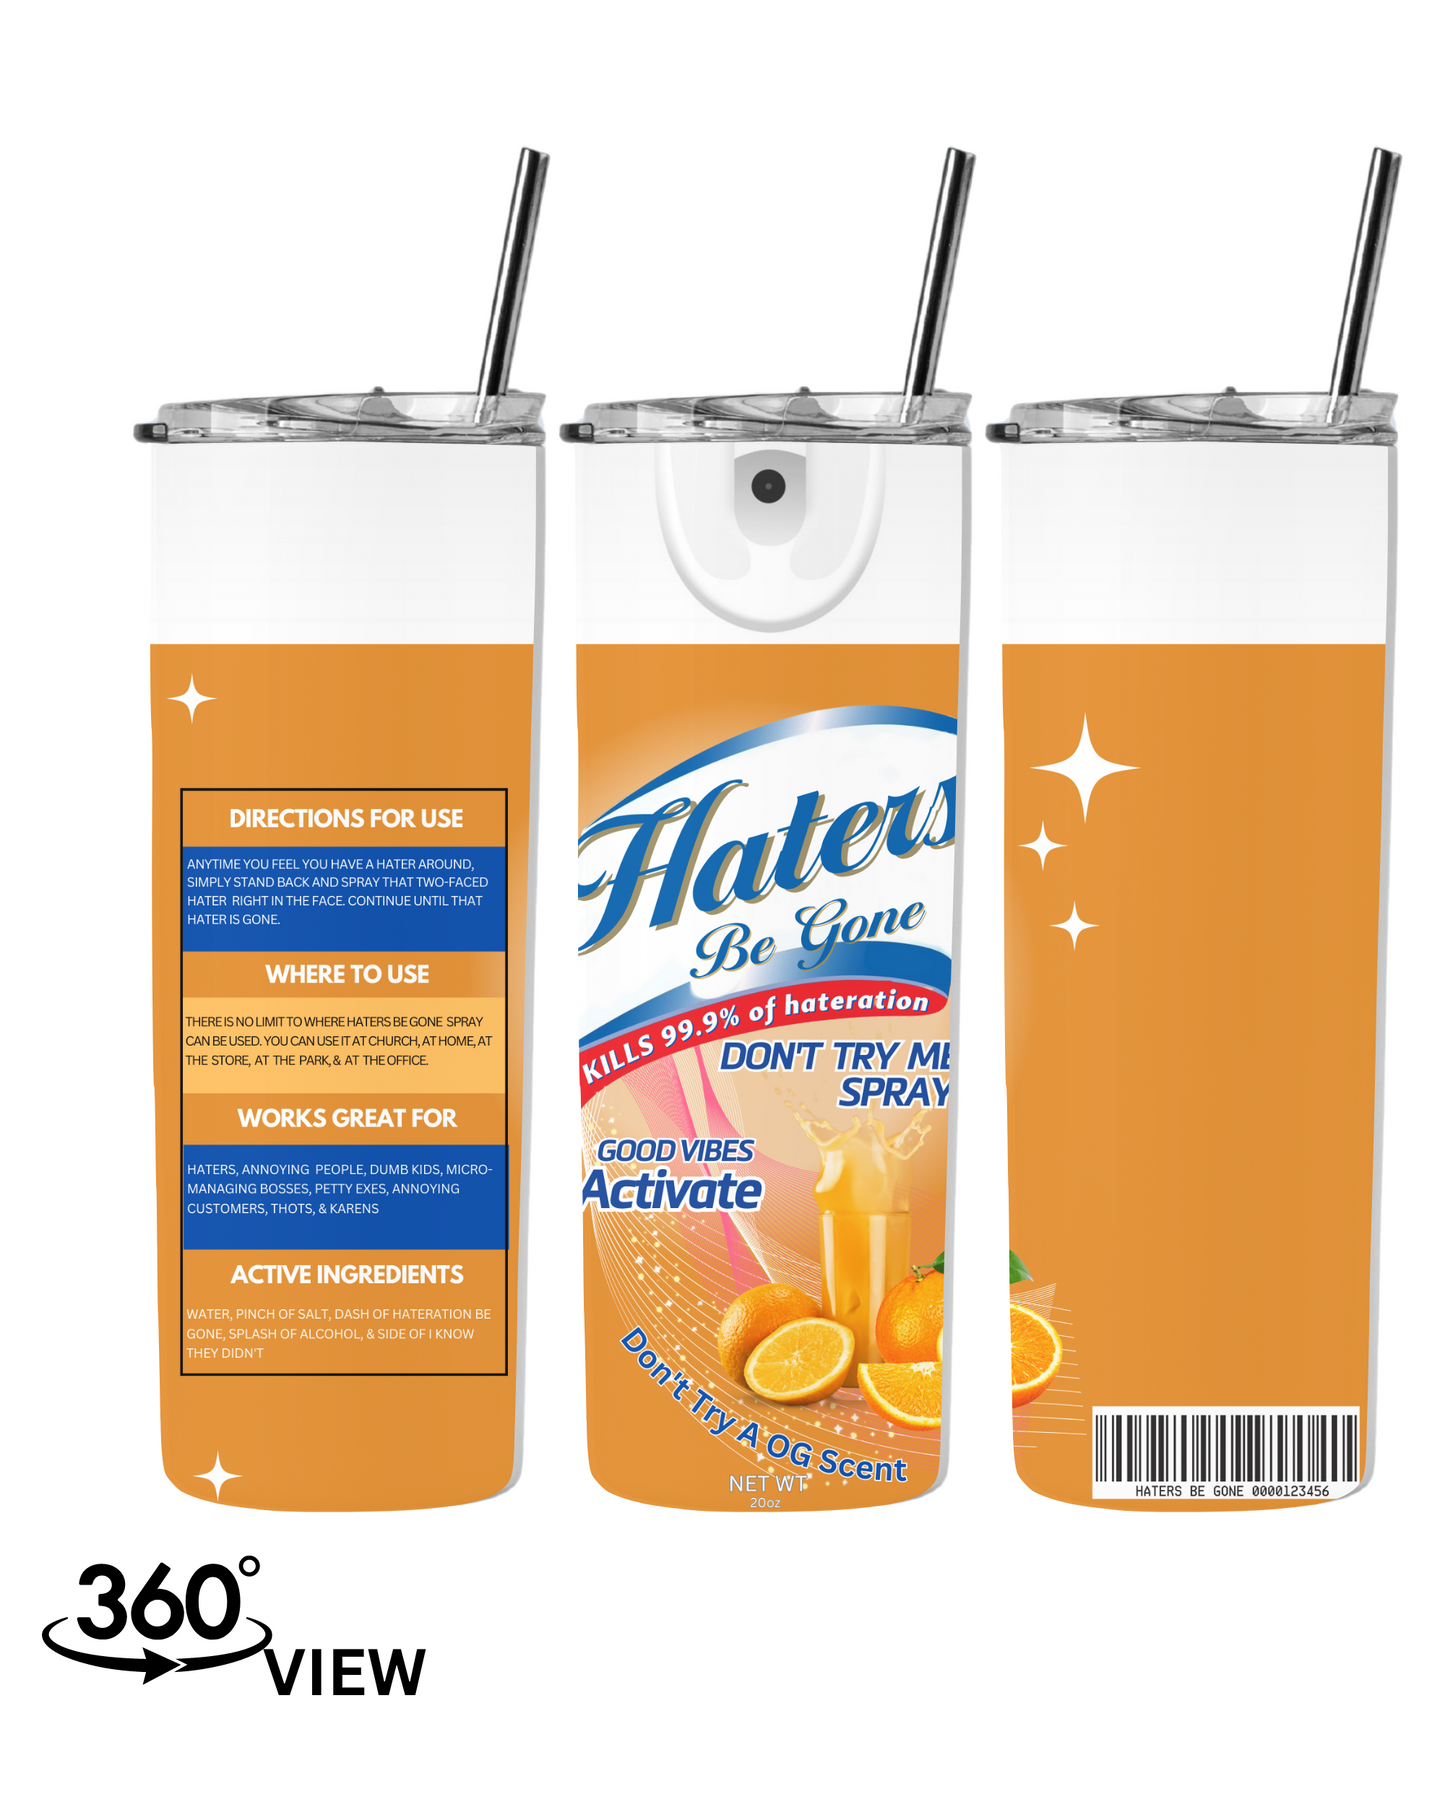 HATERS BE GONE SPRAY TUMBLER